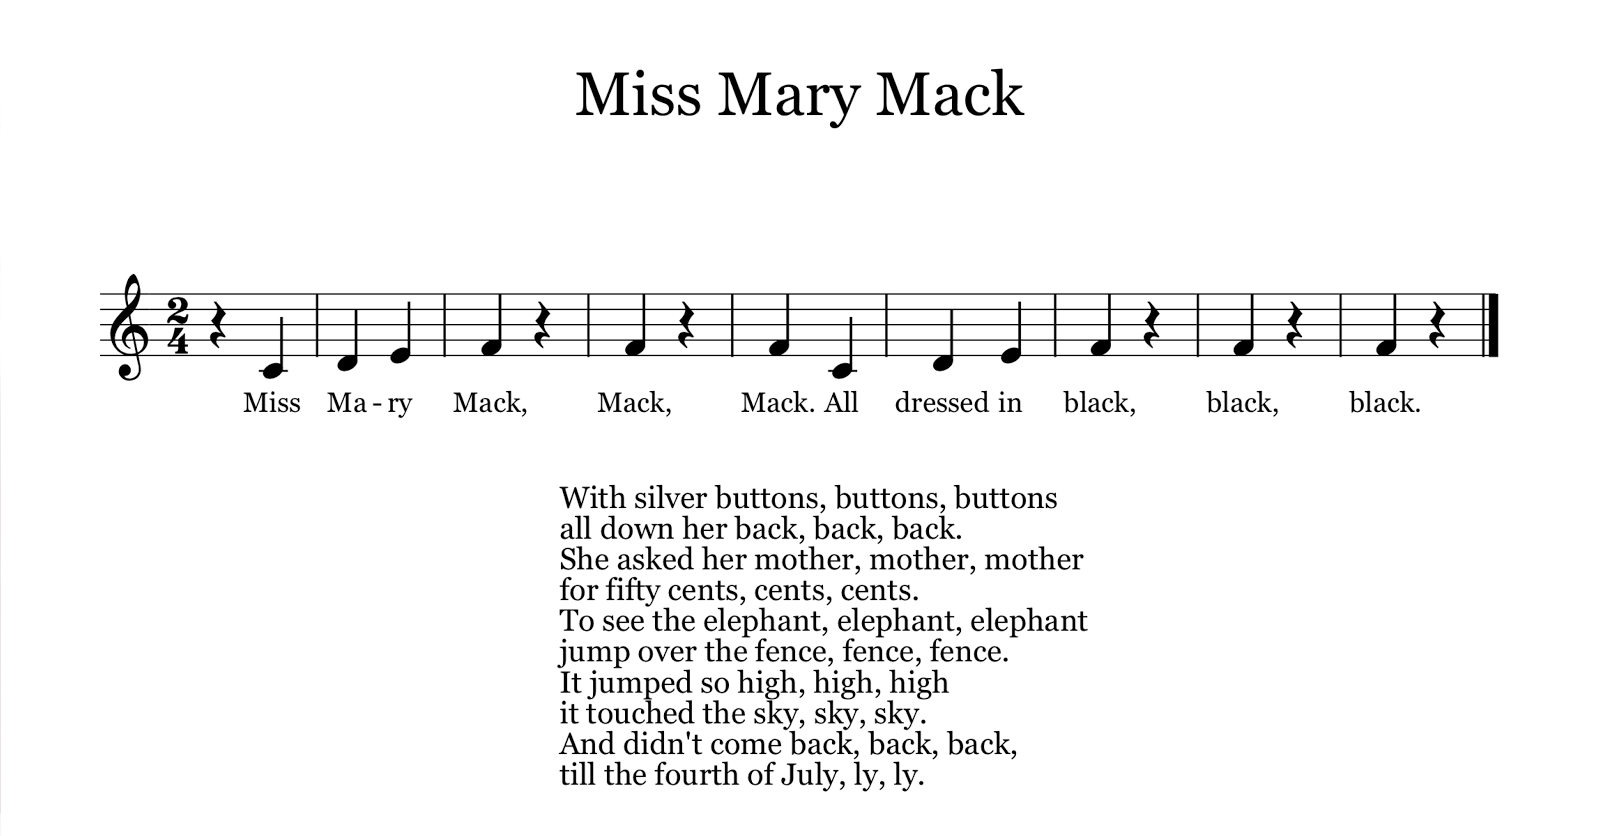 Miss Mary Mack for the Elementary Music Classroom